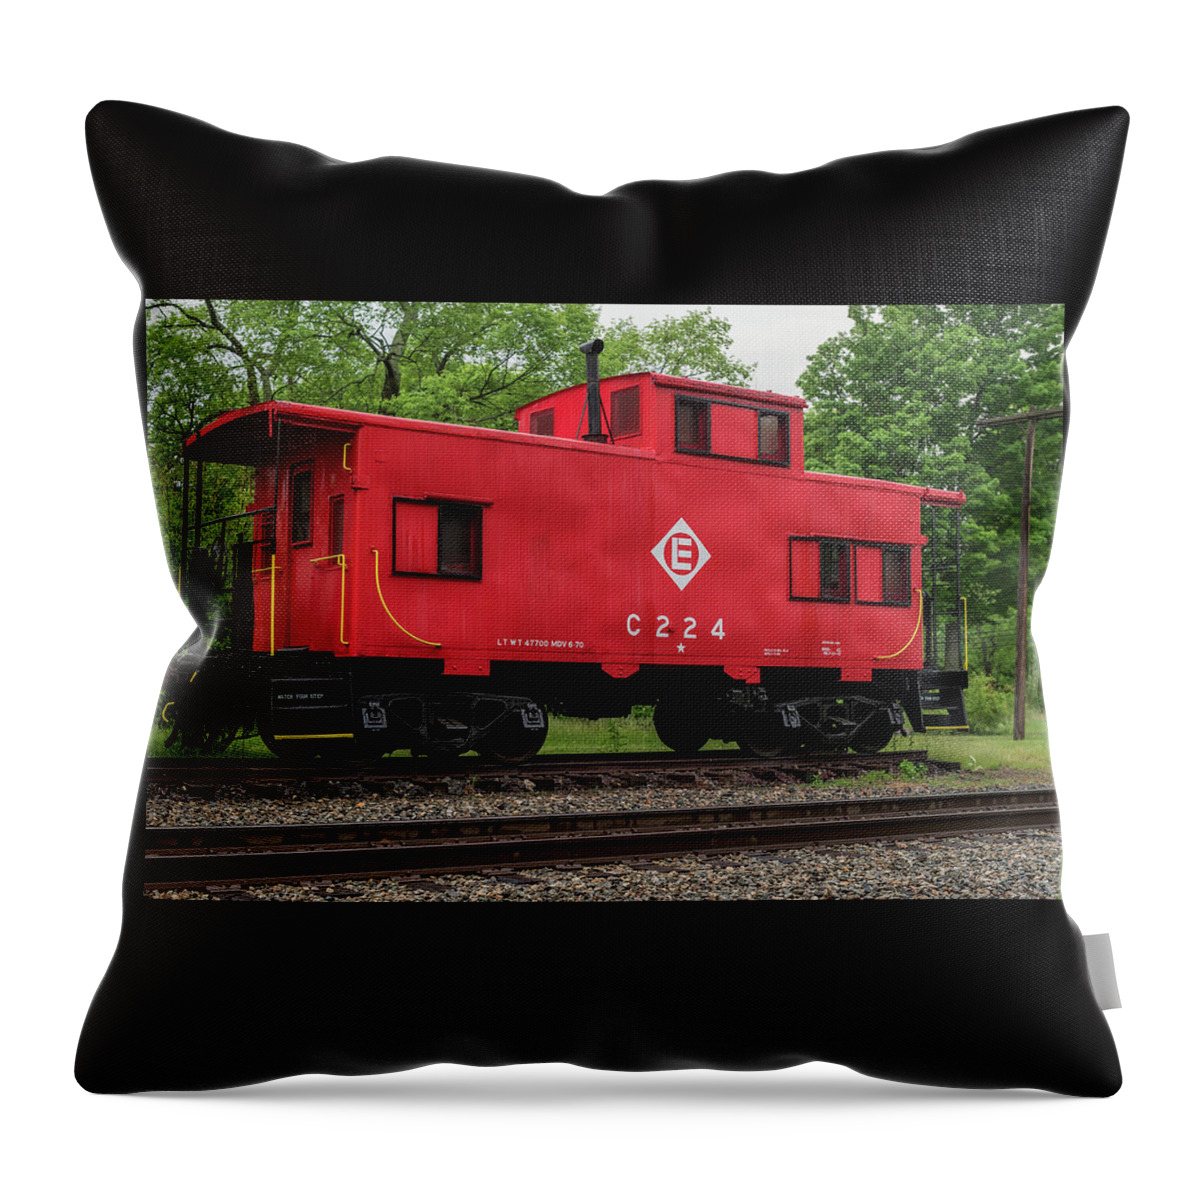 Terry D Photography Throw Pillow featuring the photograph Red Caboose C224 New Jersey by Terry DeLuco